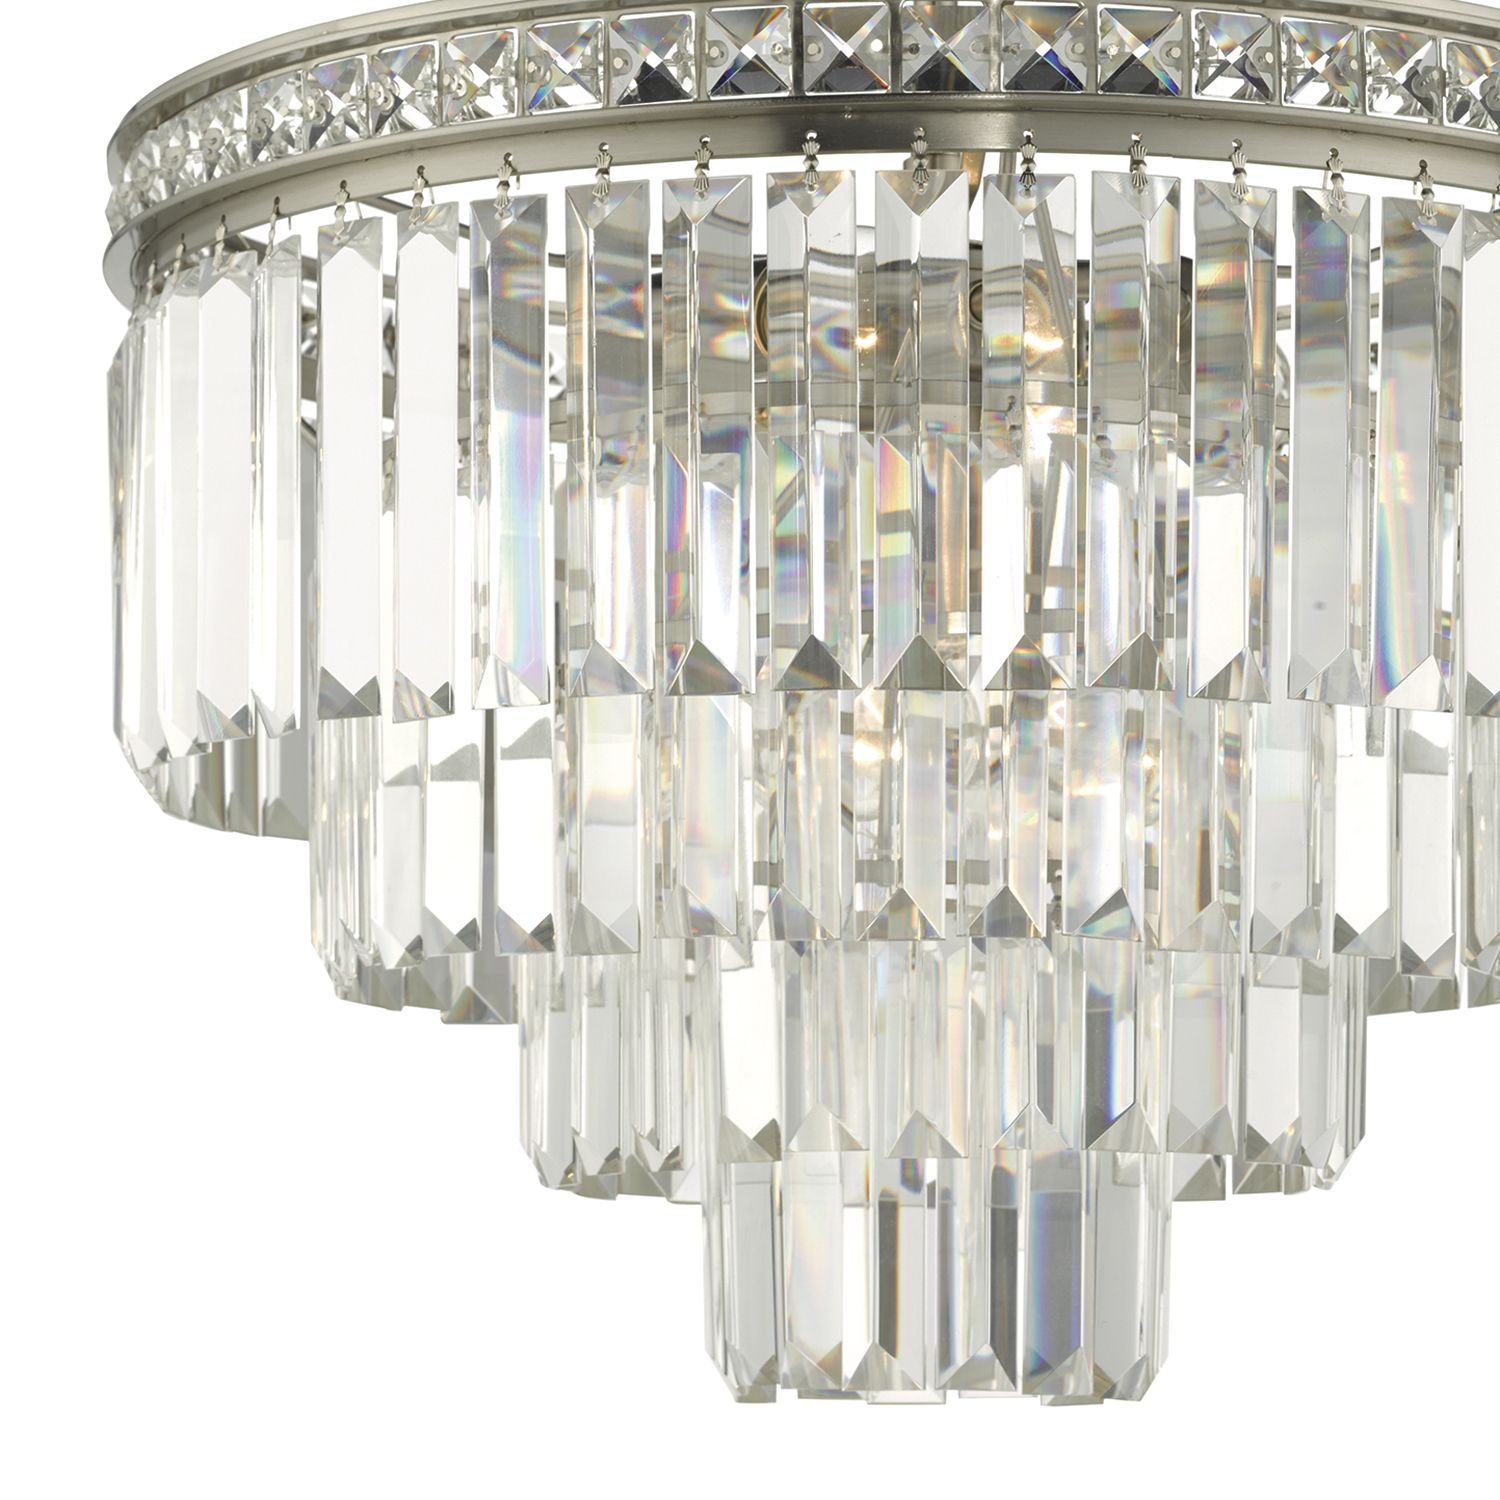 Vyana 4 Light 4 Tier Pendant Brushed Nickel And Crystal Intended For Brushed Nickel Crystal Pendant Lights (View 14 of 15)